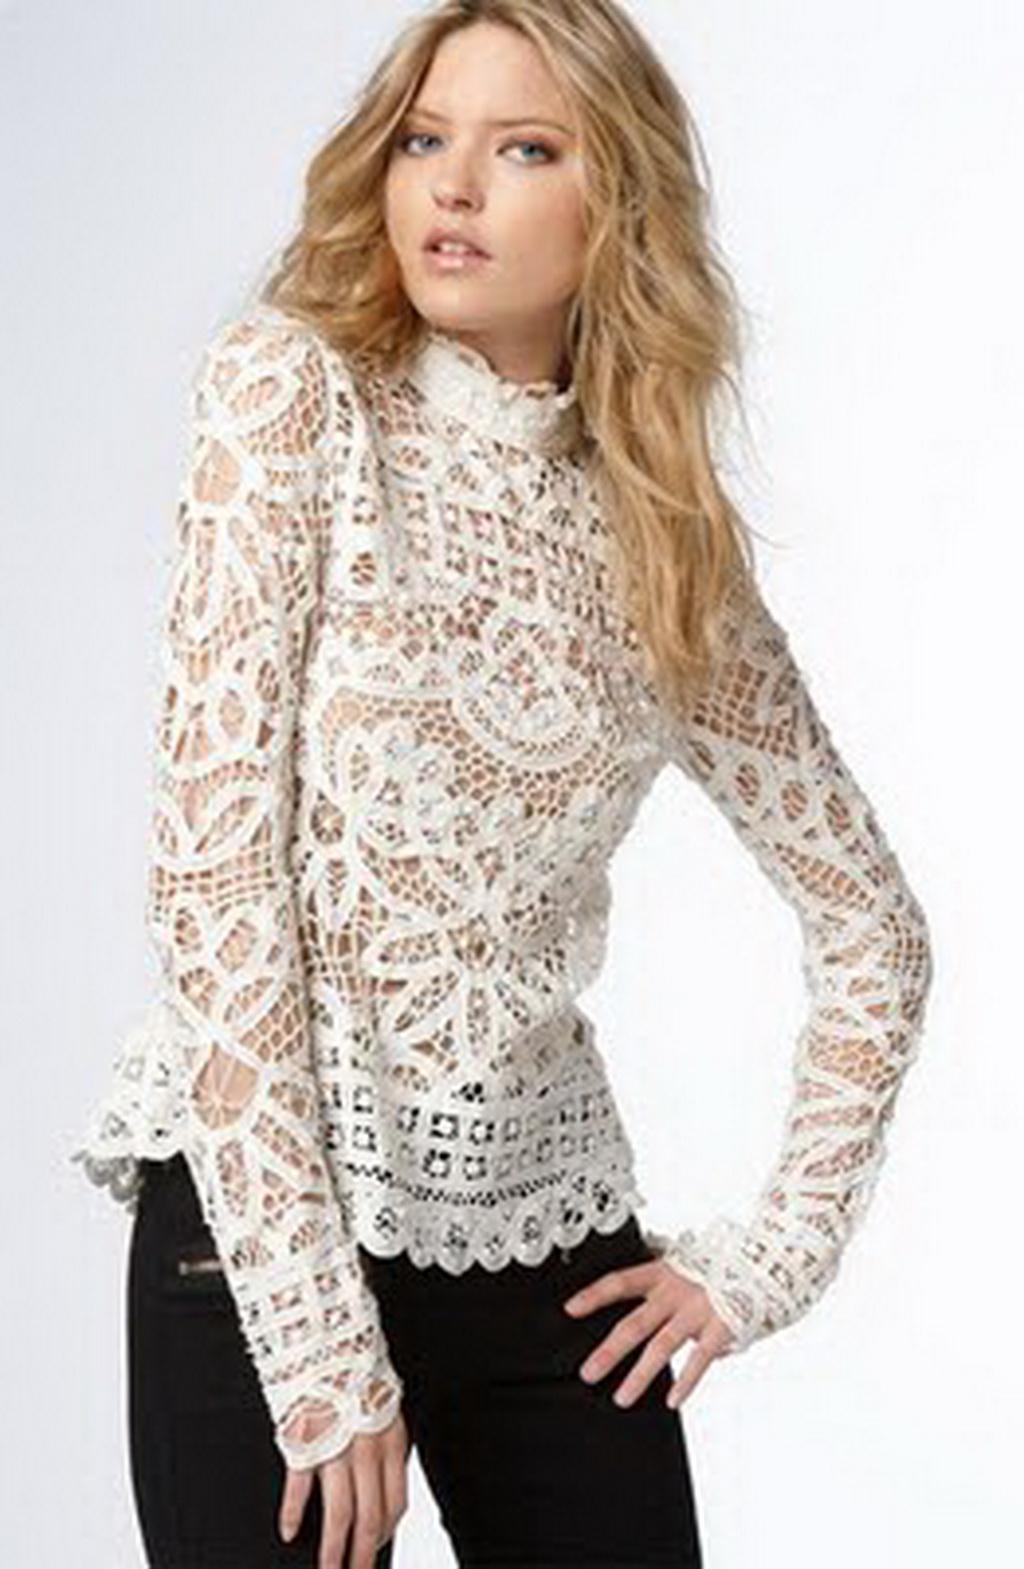  1 . wearing lace top white